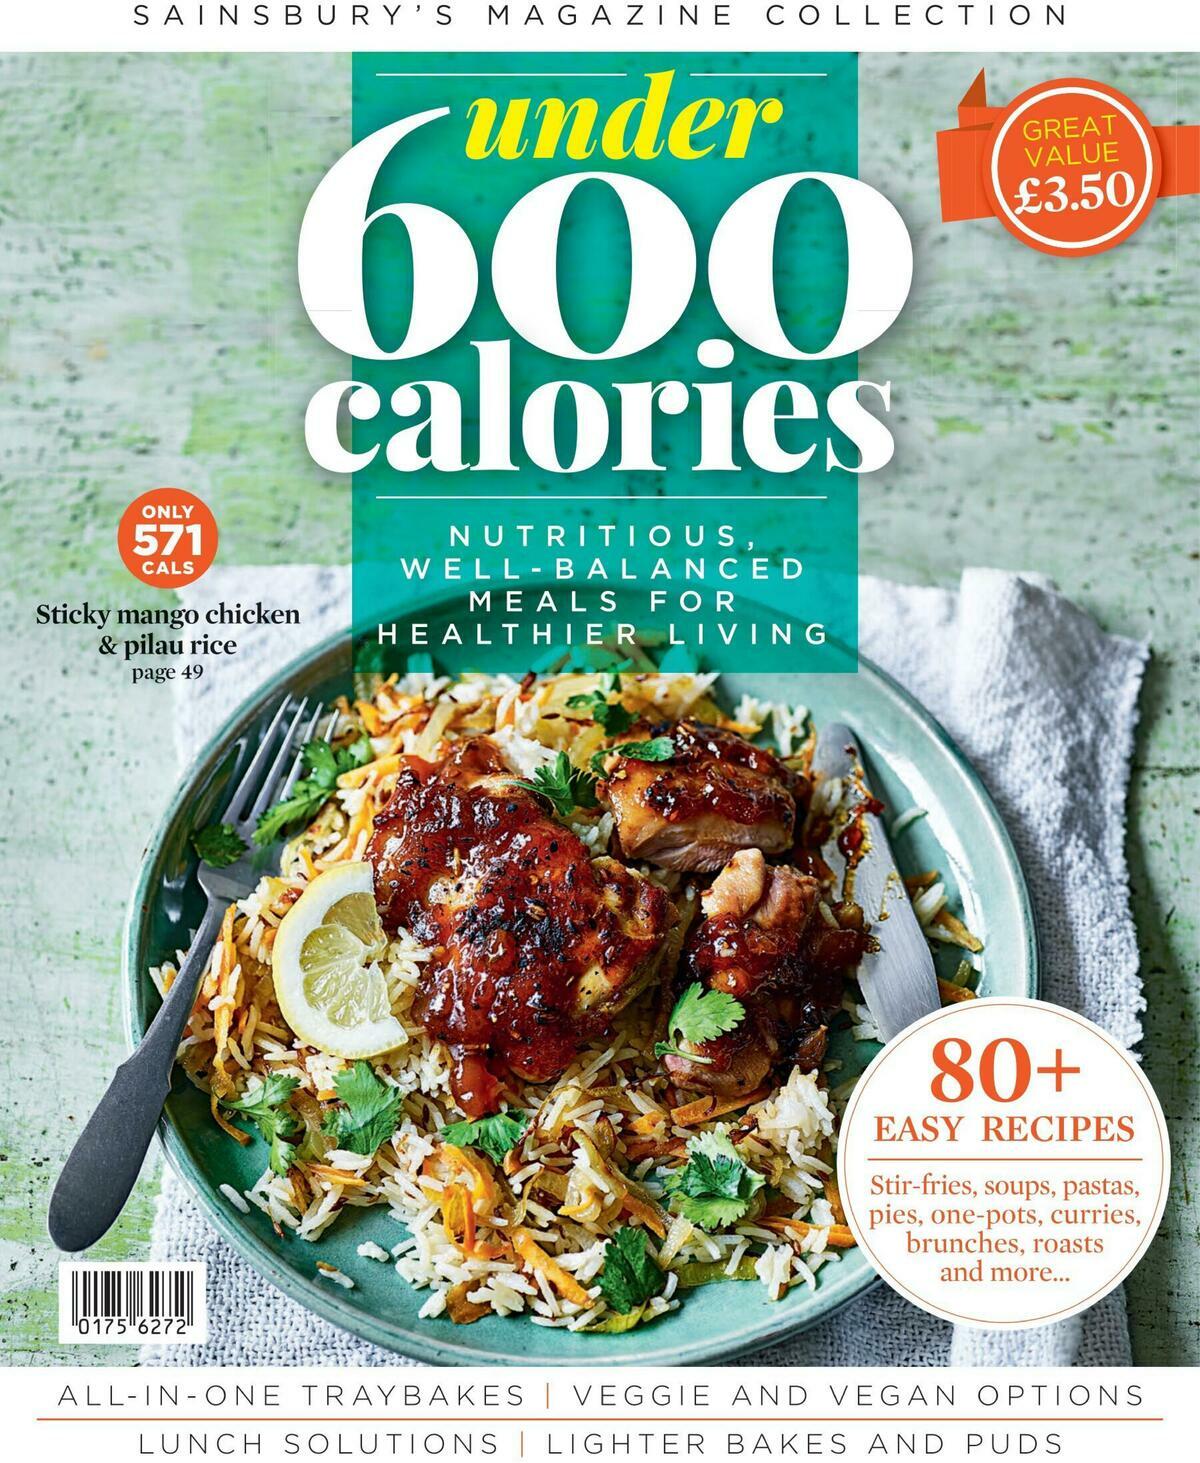 Sainsbury's Magazine – Collection Under 600 Calories Offers from December 20